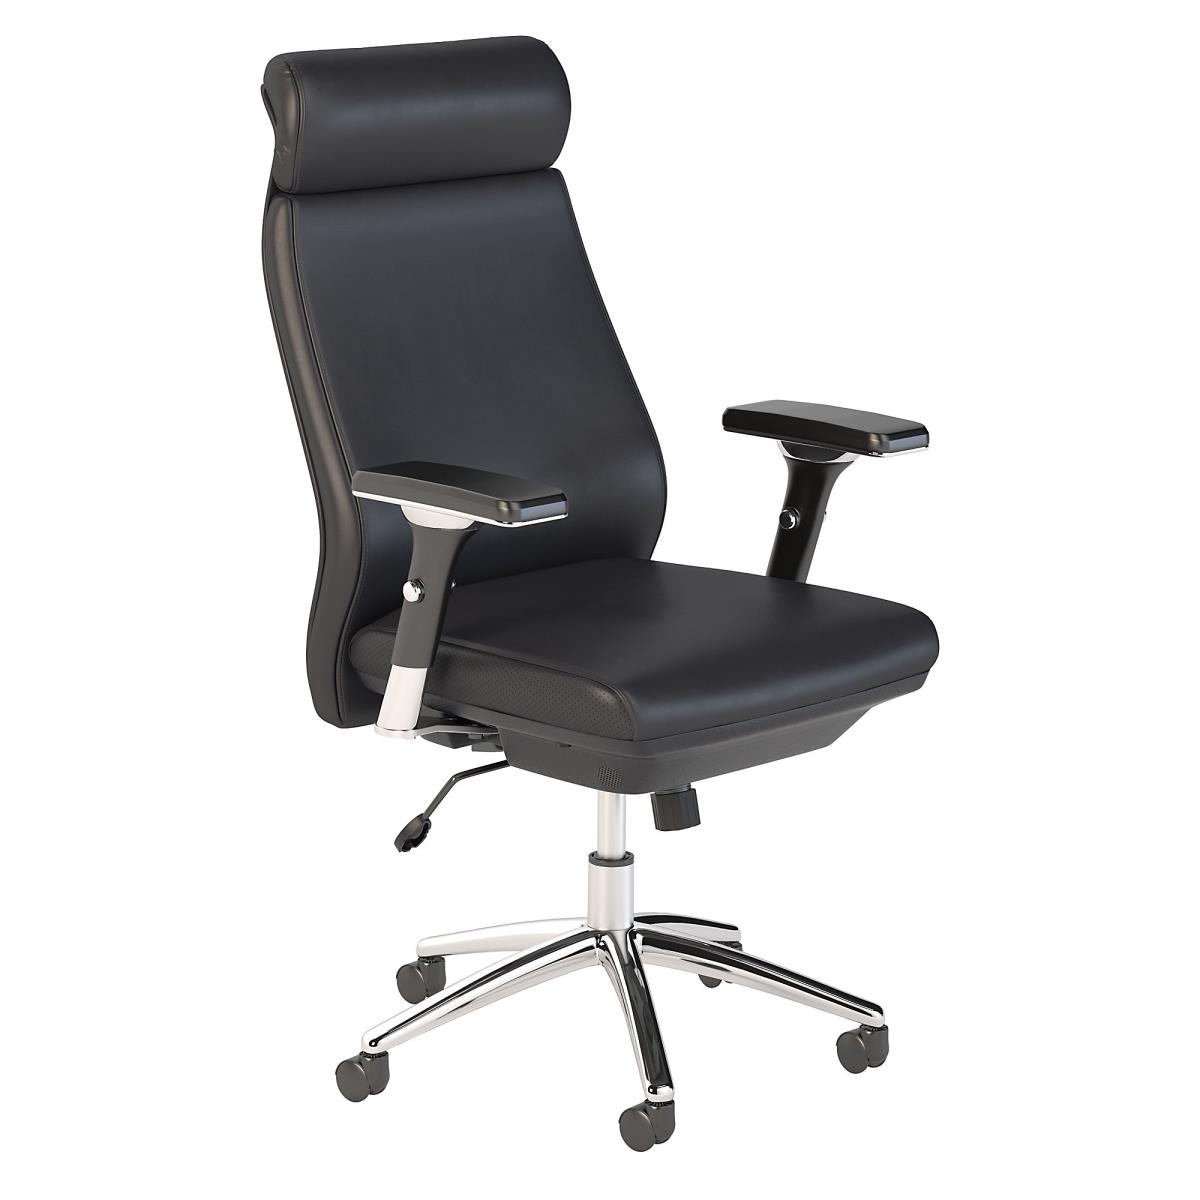 Ch1601bll-03 Metropolis High Back Leather Executive Office Chair - Black Leather